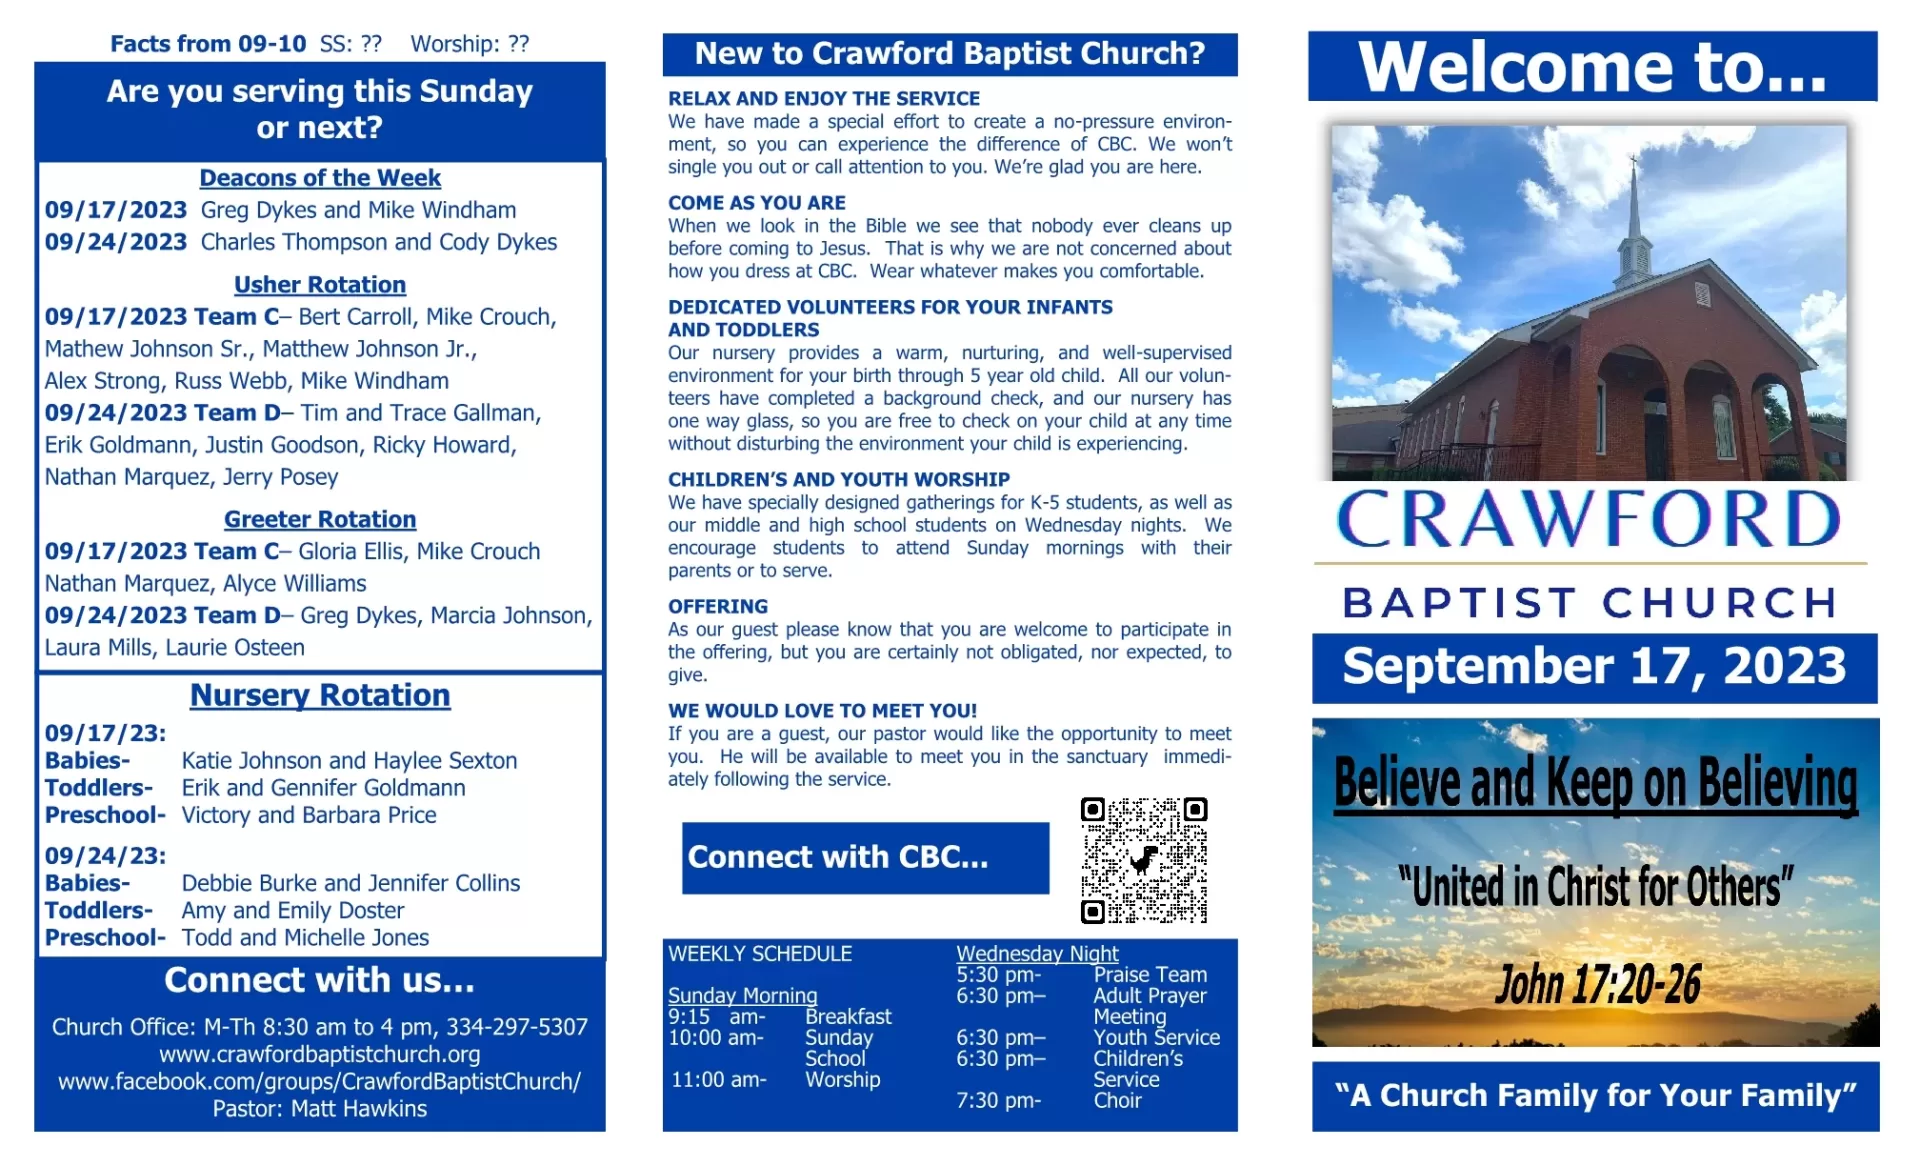 Worship Guide » Crawford Baptist Church A Church Family for Your Family